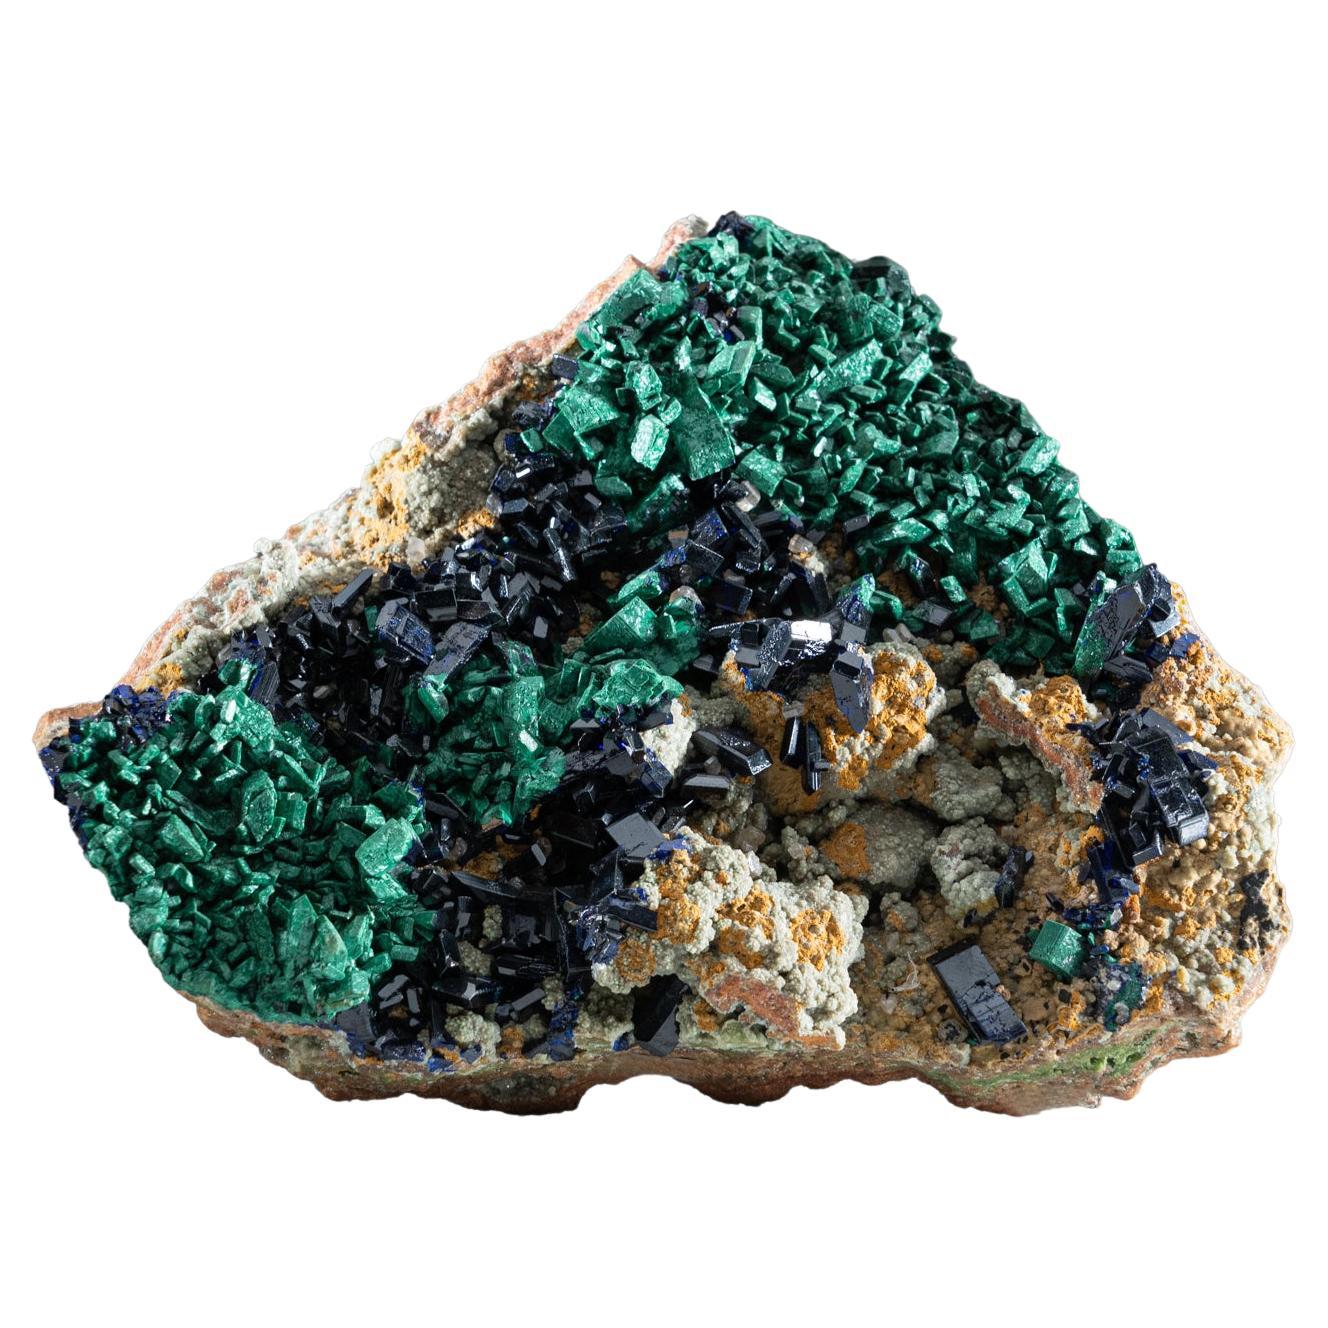  Azurite Mineral Crystal on Malachite Calcite Matrix From , Namibia For Sale